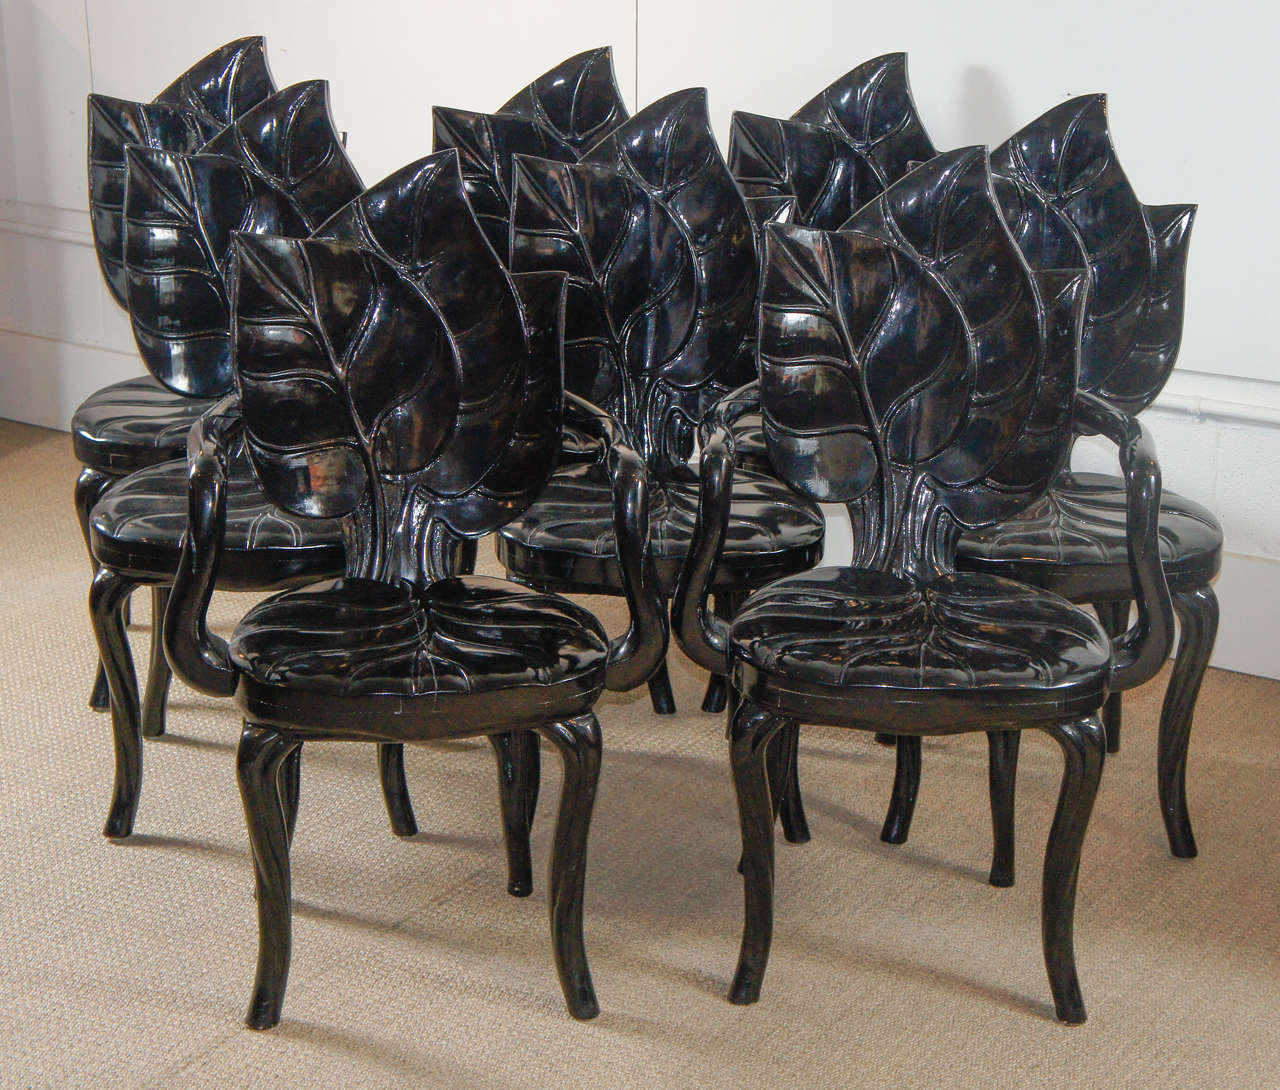 Here  is a beautiful group of eight black lacquered palm leaf chairs including two arms. The chairs are carved out of solid wood and has matching back detail. The chairs have a high gloss black lacquered finish.